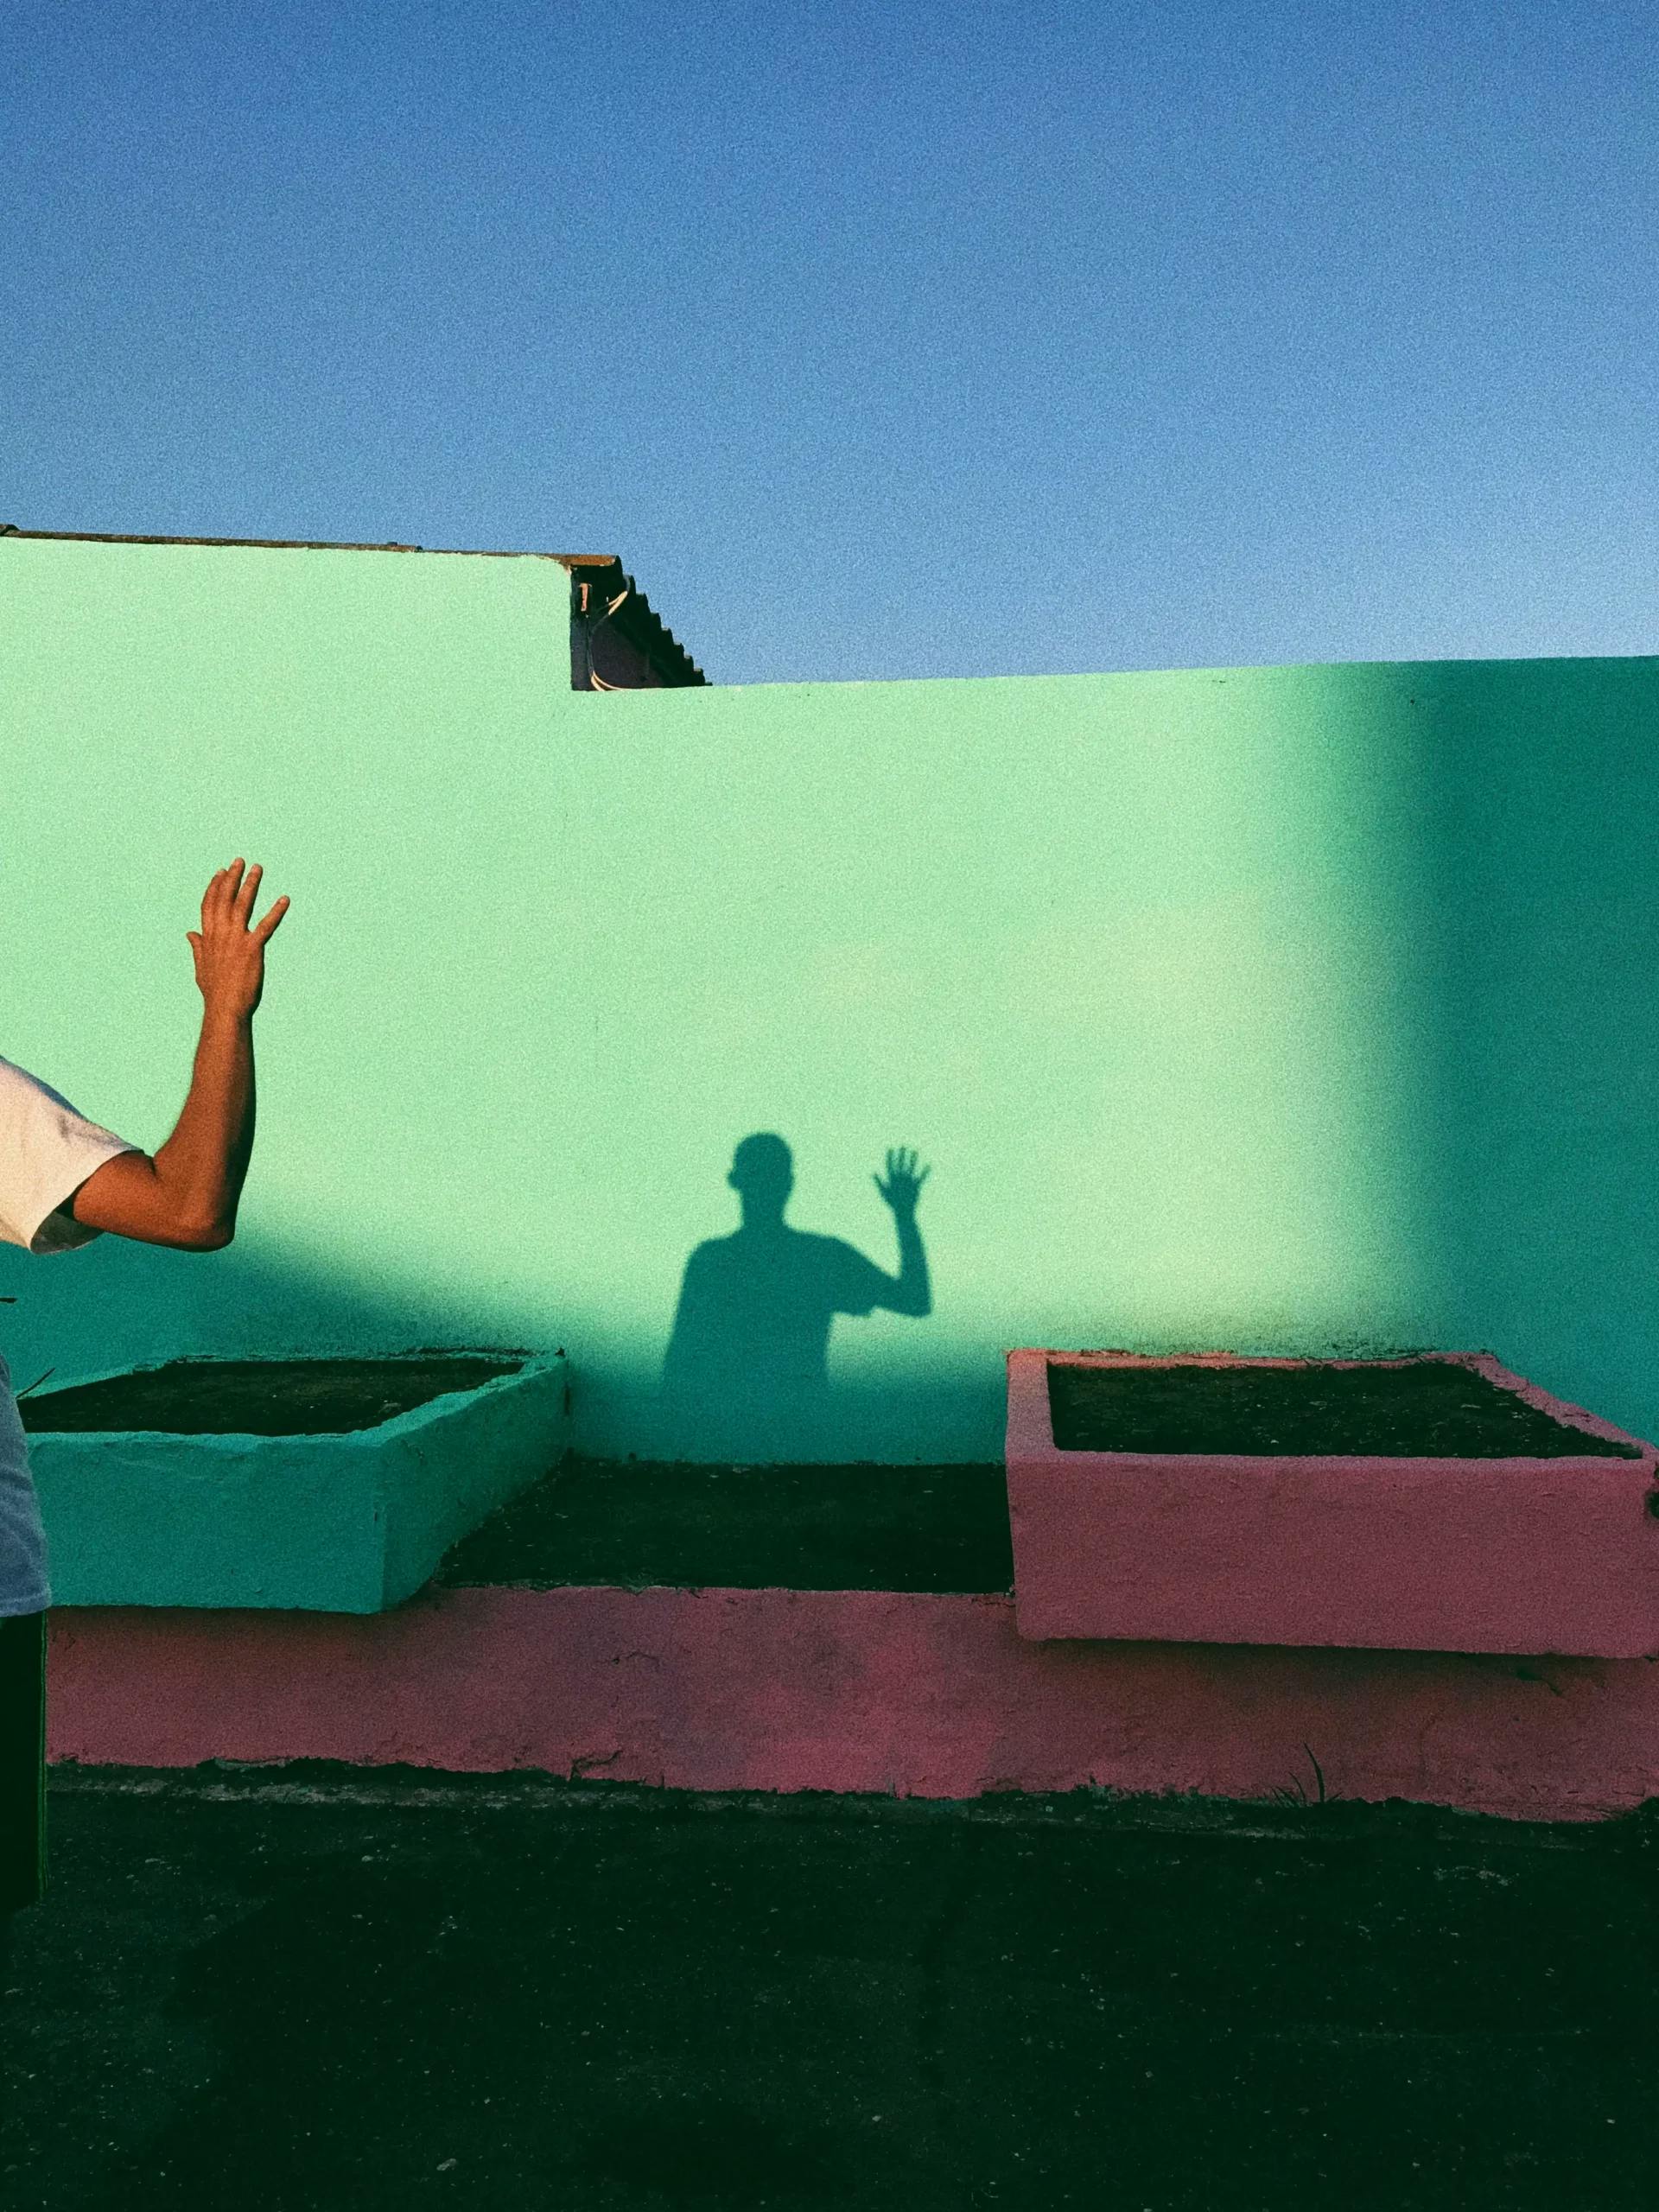 Shadow of a person waving against a colourful wall,